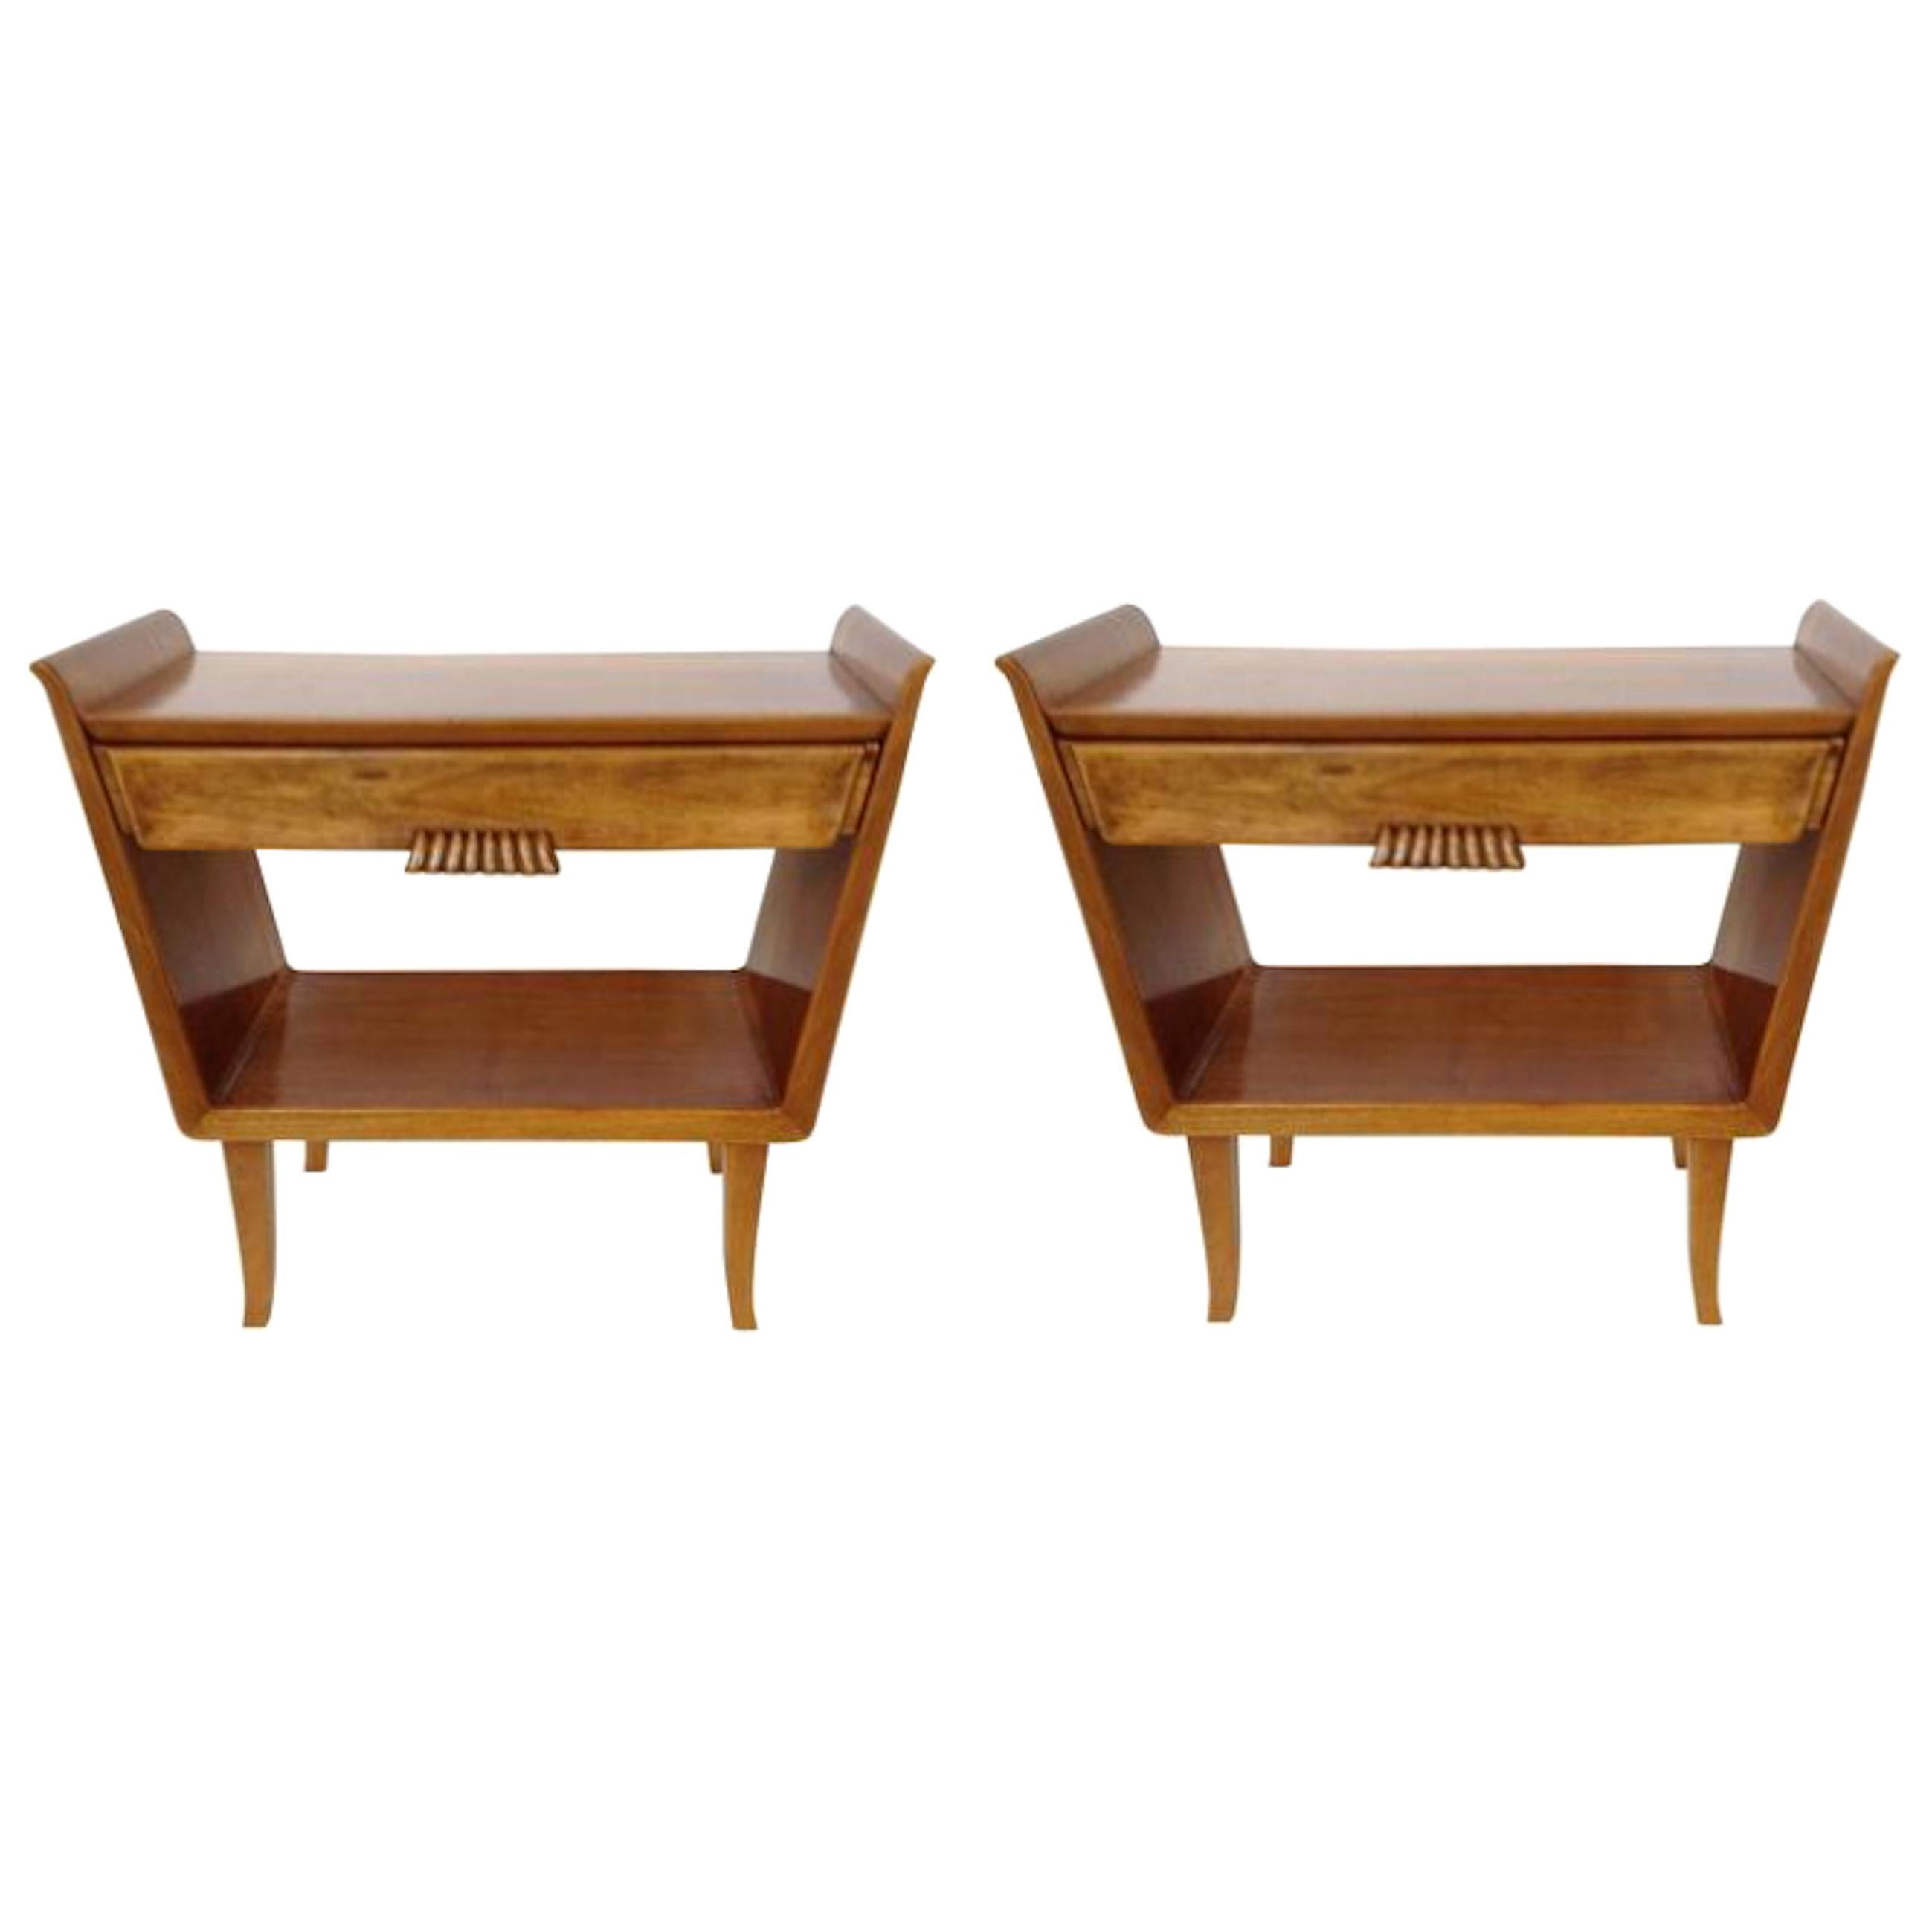 Pair of Italian clear fruitwood Vintage nightstands, with 1 drawer each.
Stylish and elegant Italian Mid-Century Modern bedside cabinets.